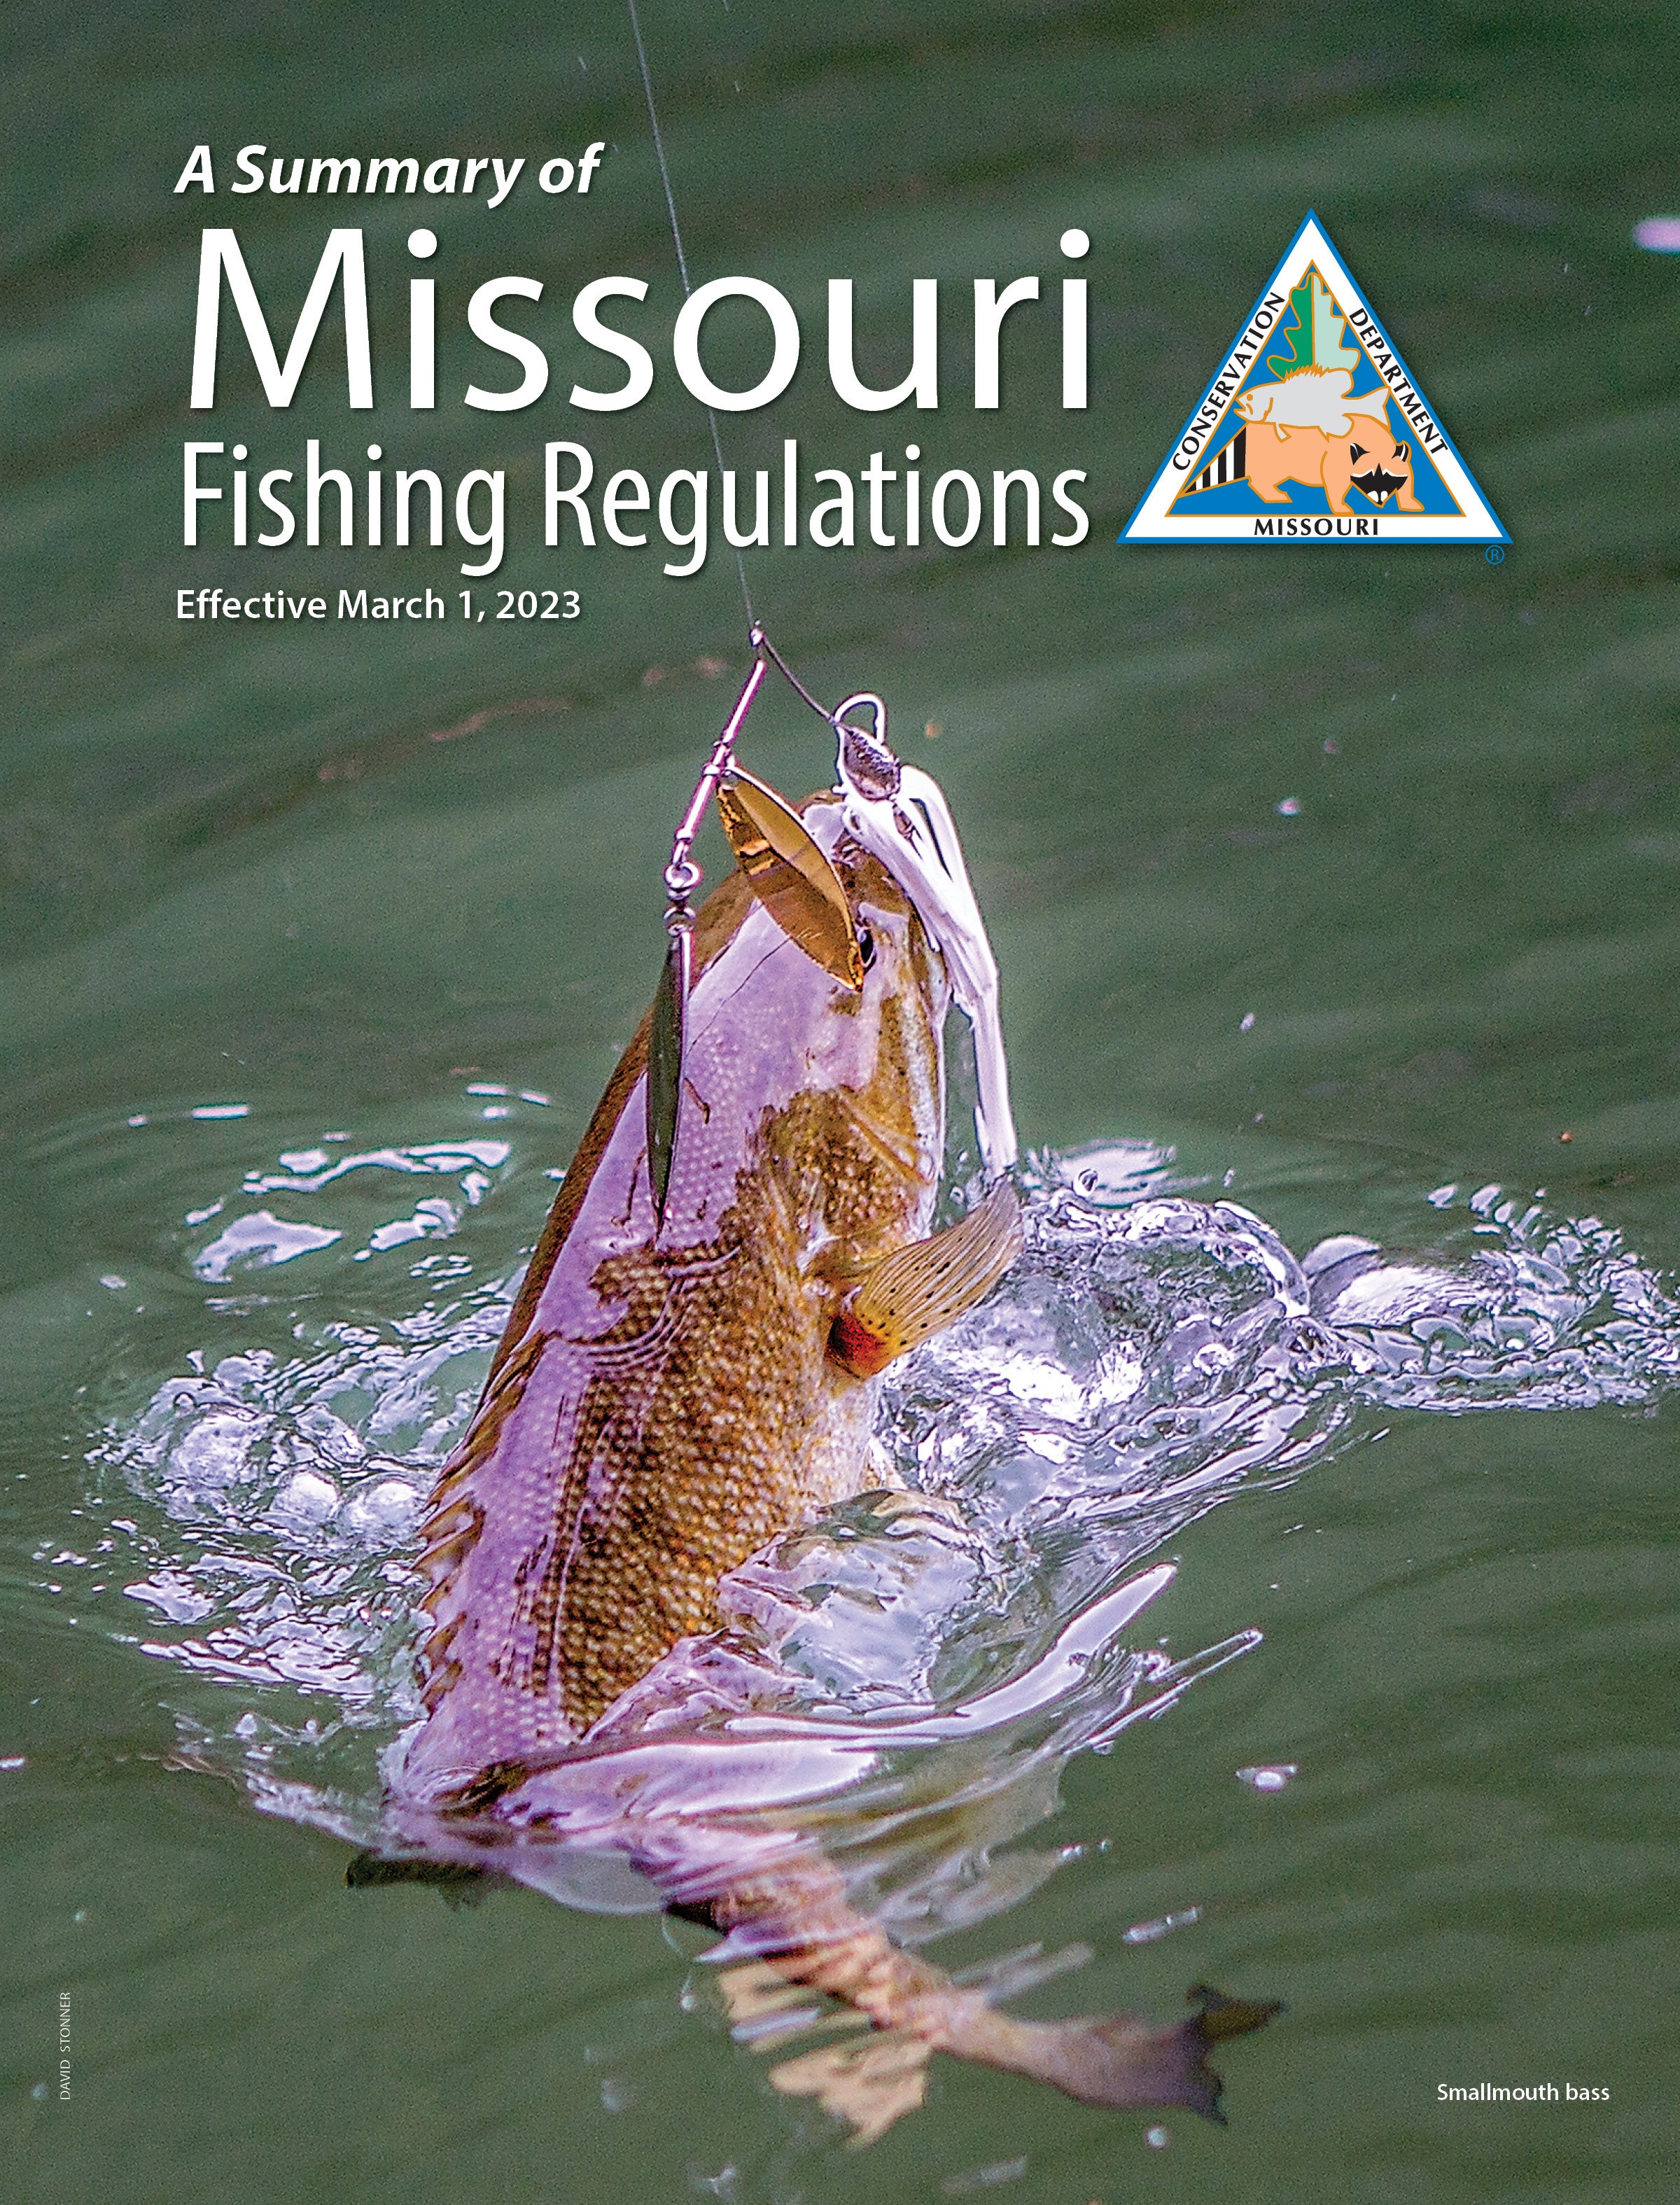 Cover of fishing regulation summary showing a smallmouth bass hooked on a line.